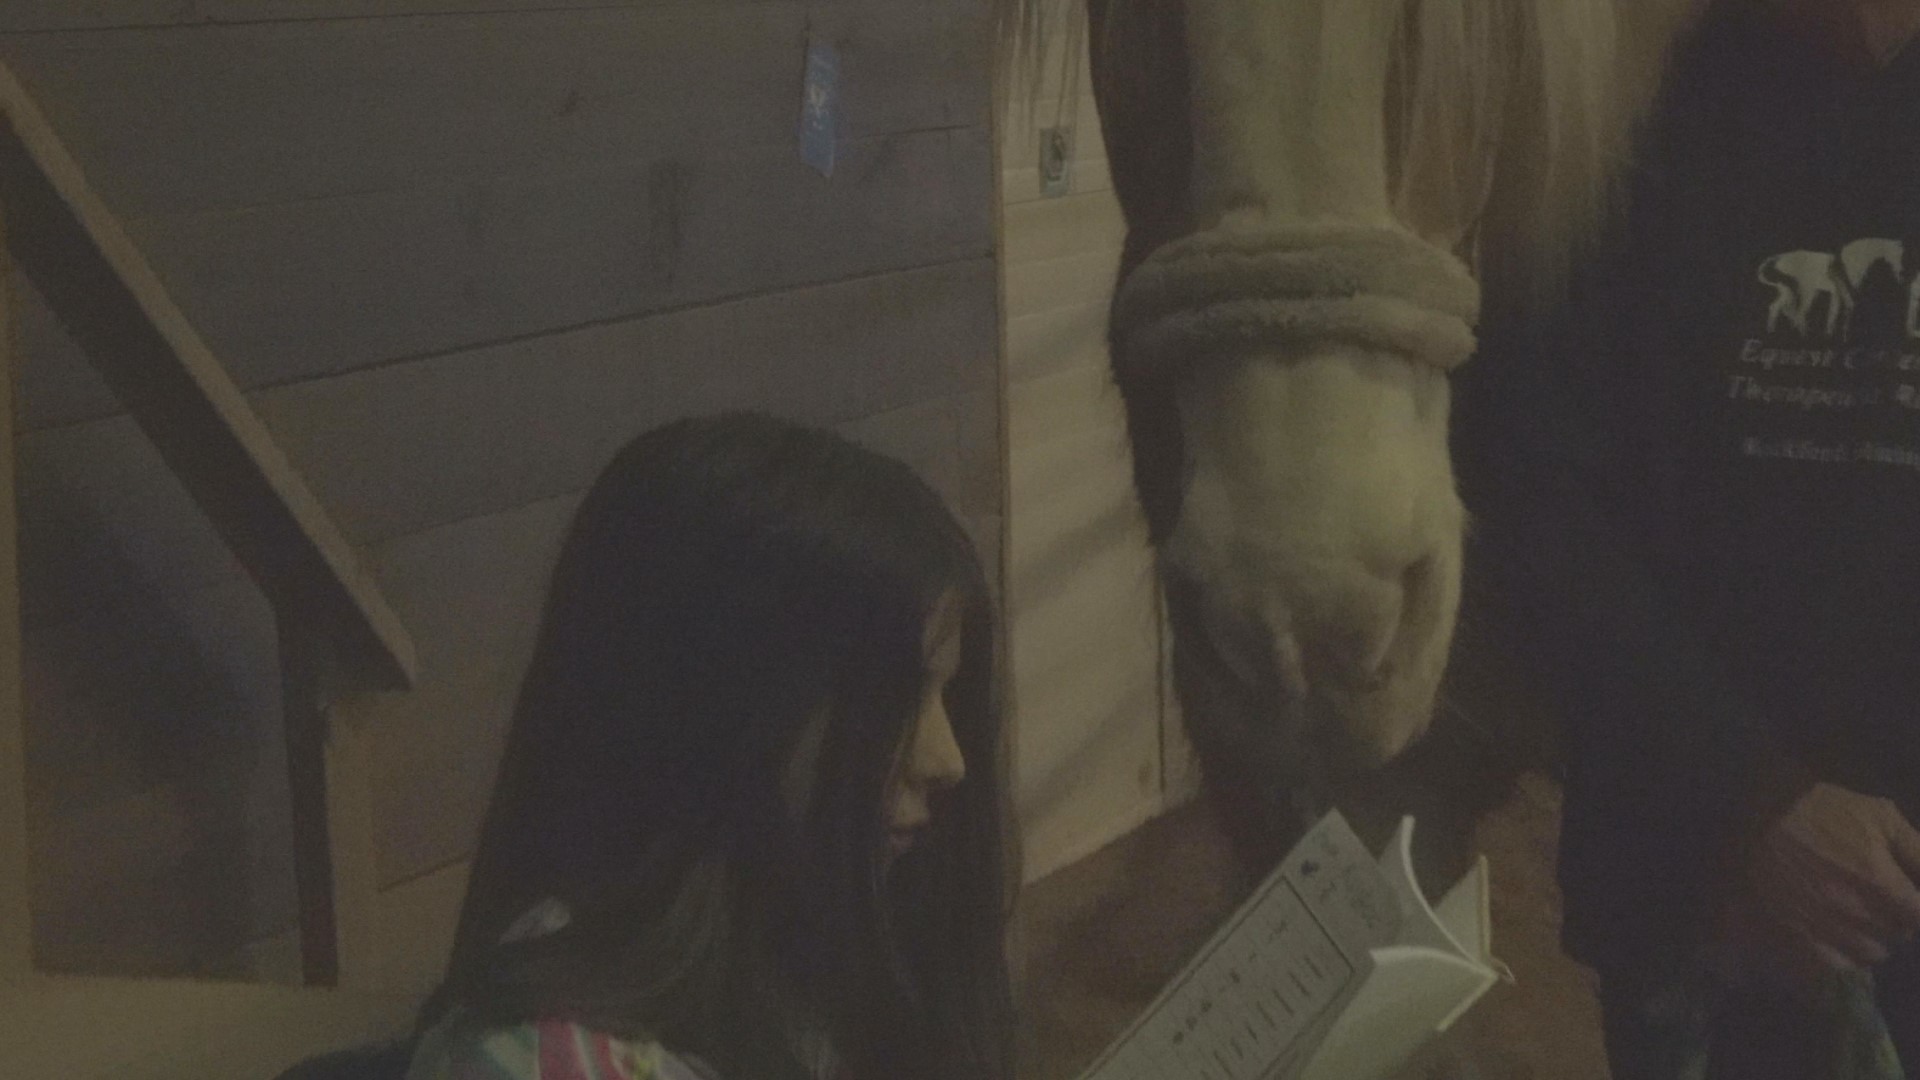 The Equest Center for Therapeutic Riding in Rockford took a whole new approach to National Reading Month, using horses to help students gain a love for reading.